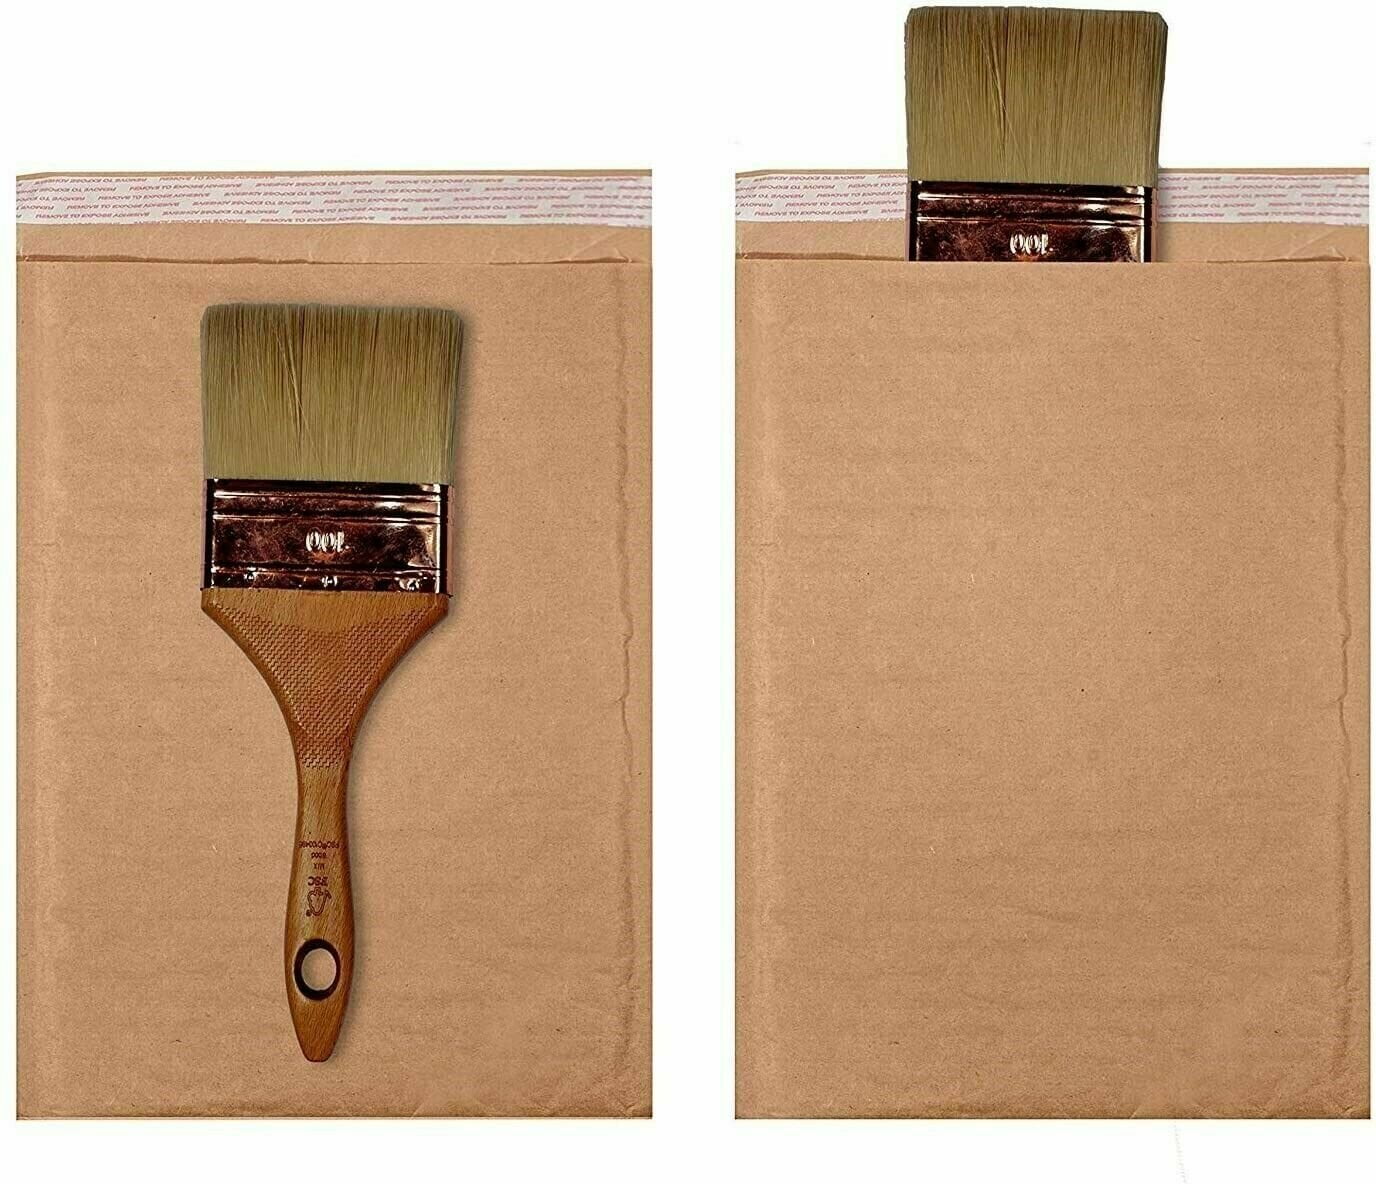 ESSENTIAL #1 500 Piece Coin Envelopes 2.25 x 3.5 with Gummed Flap, Small  Parts Envelope for Home and Office Use (Brown -500)